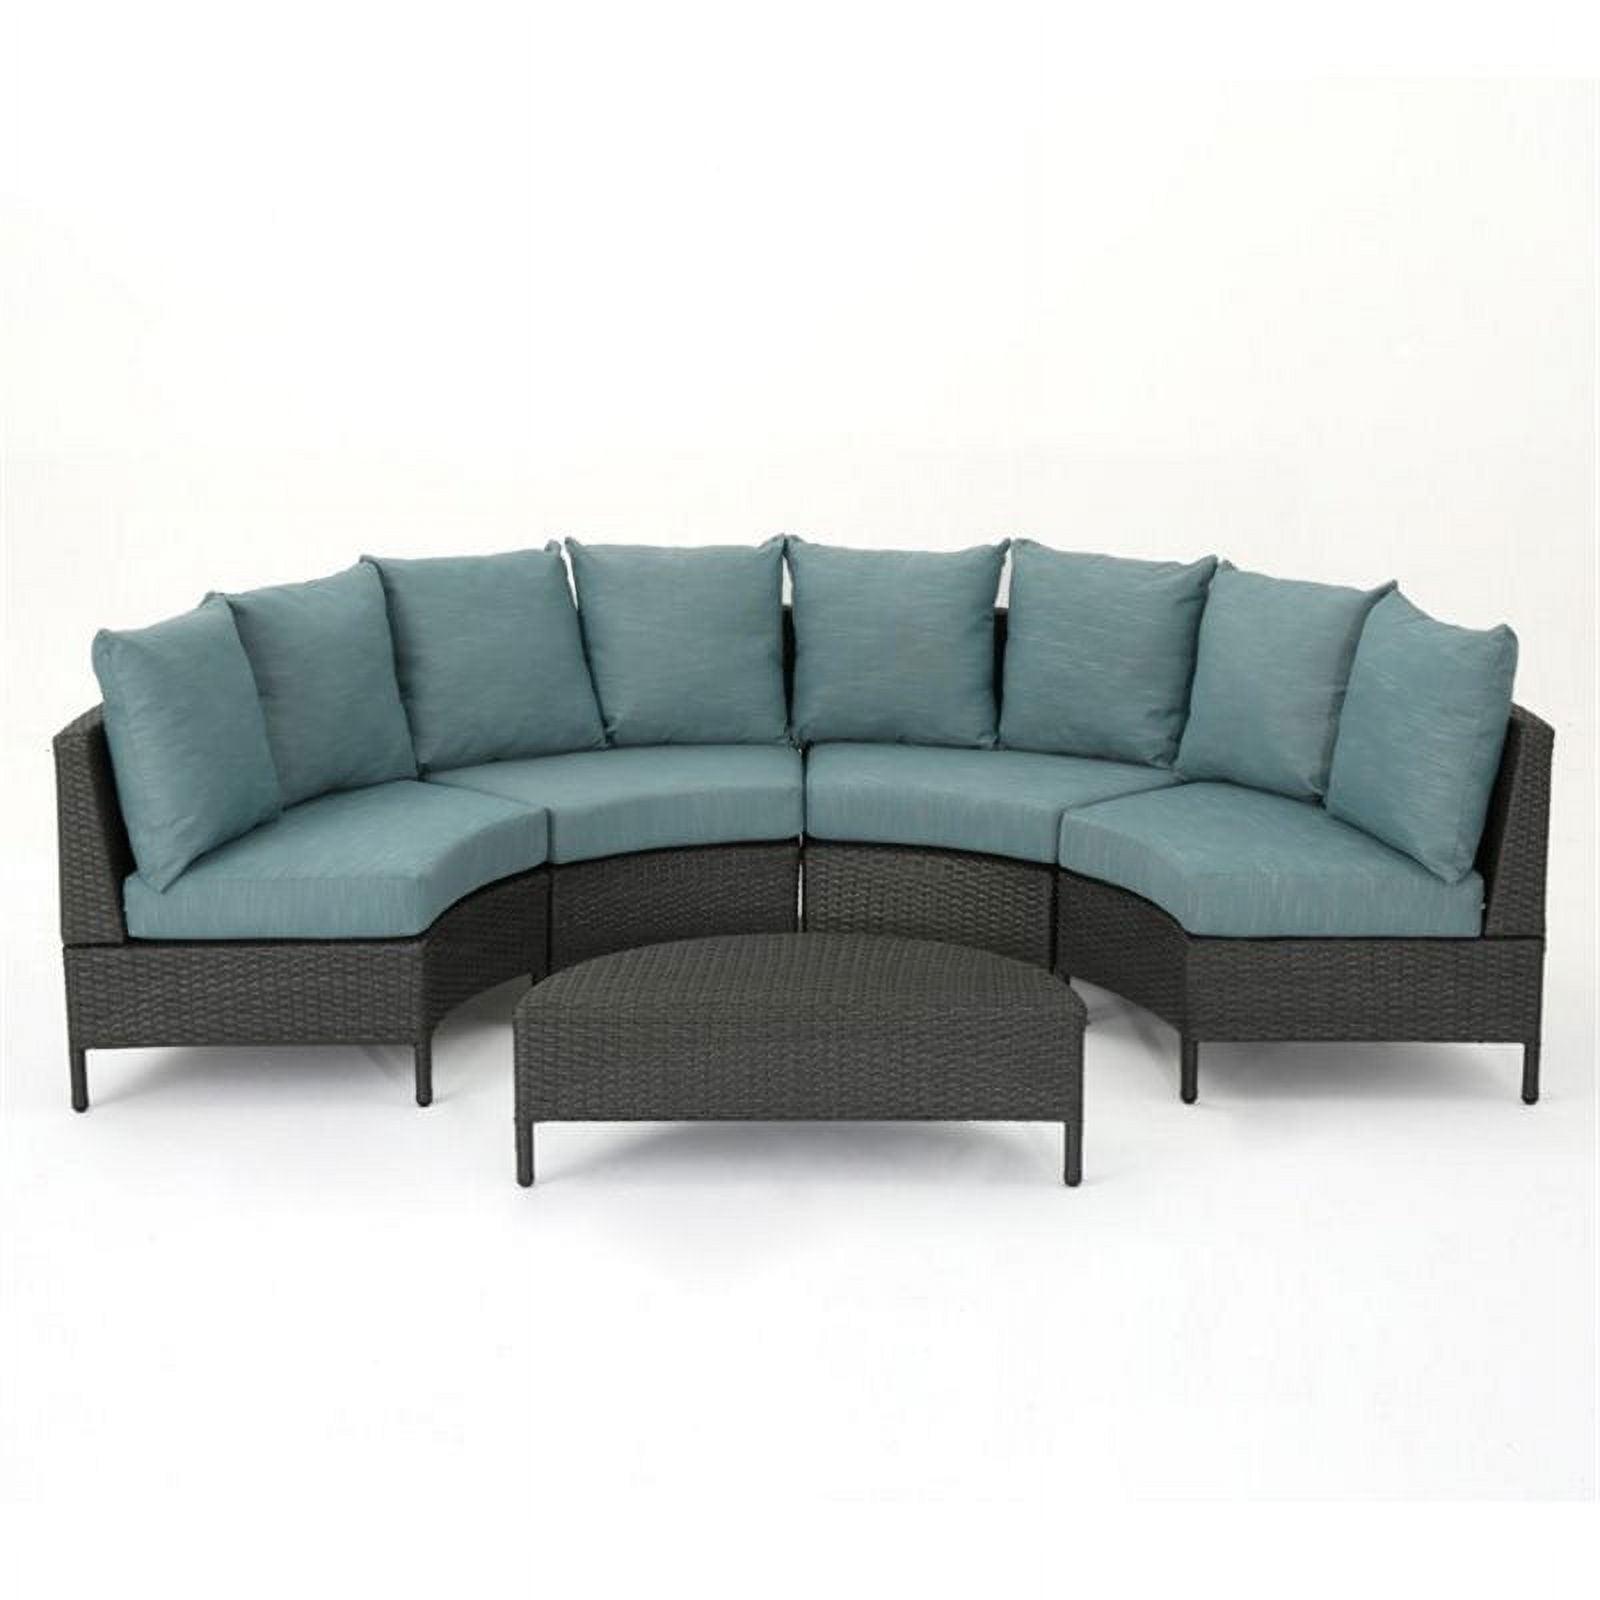 Transitional Gray and Teal Wicker Sectional Sofa Set with Water-Resistant Cushions